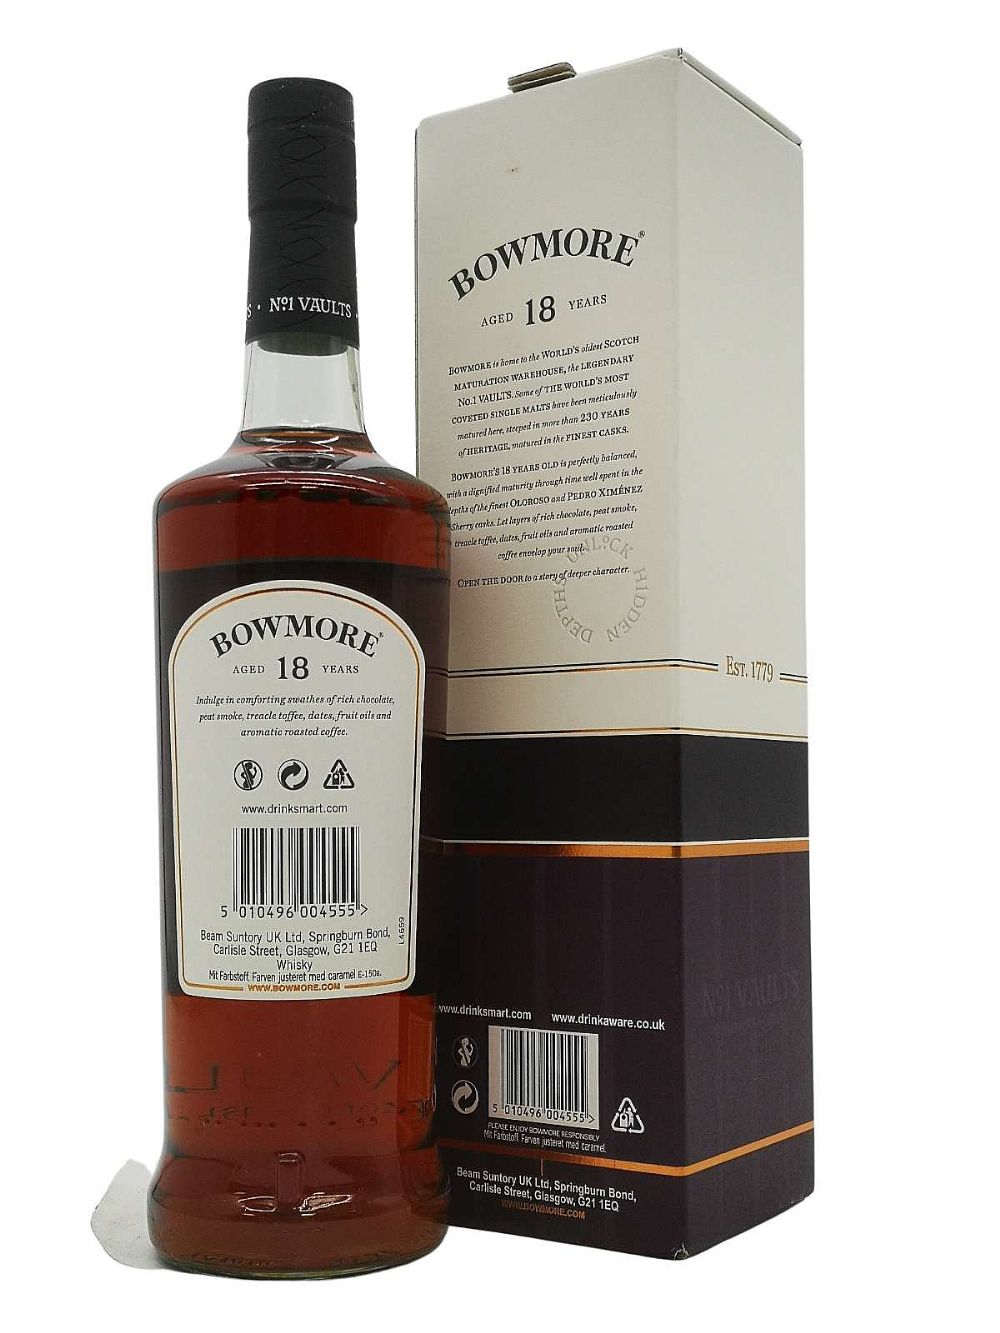 bowmore 18 travel exclusive